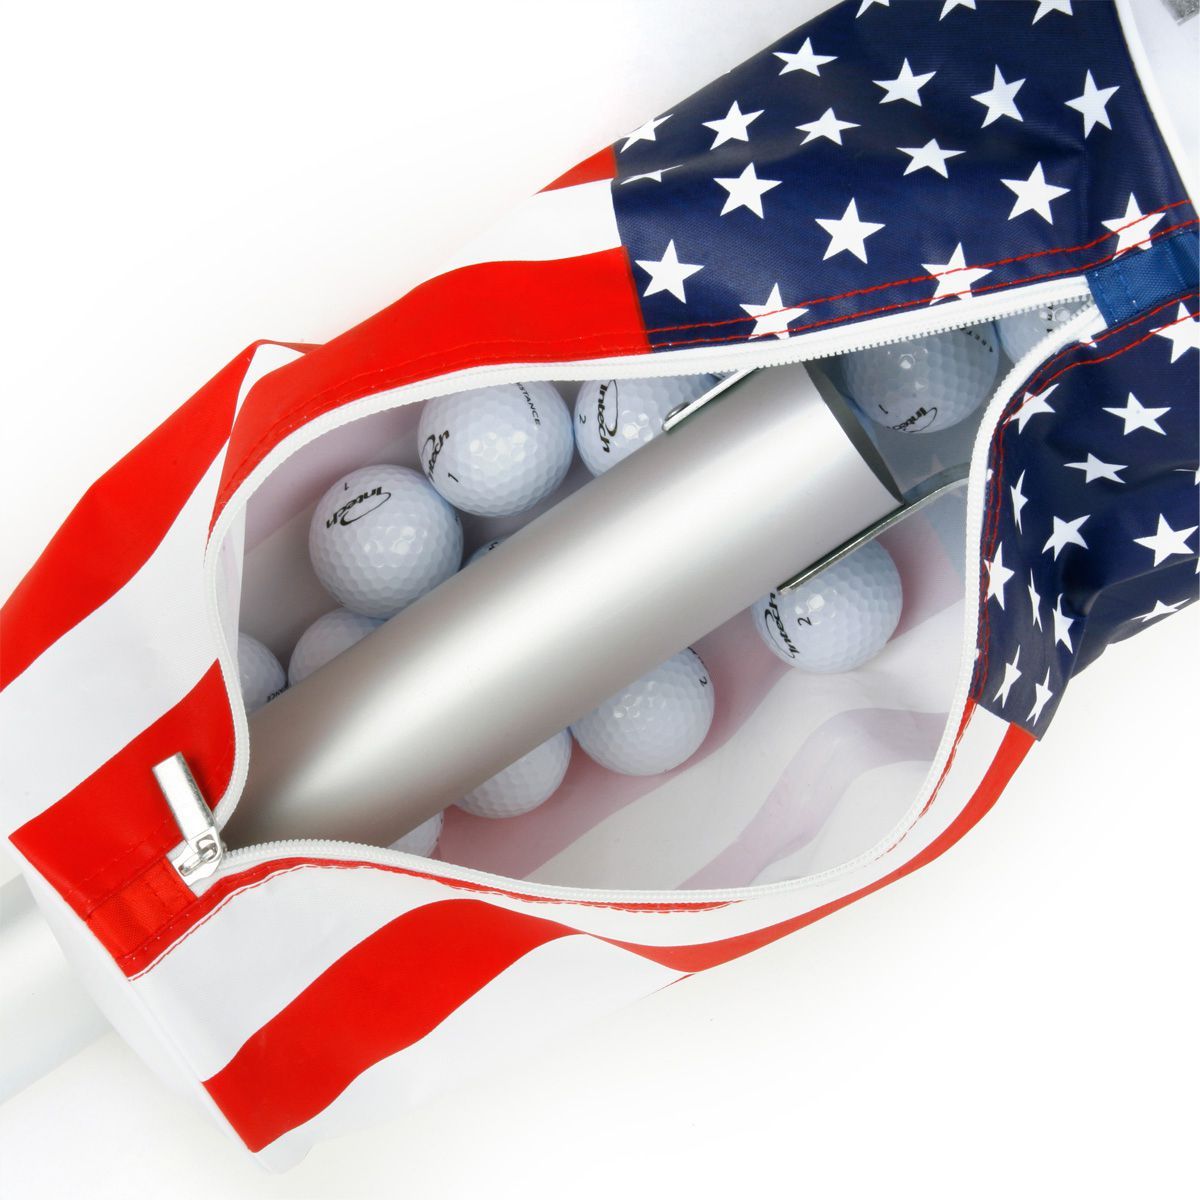 golf balls inside the zippered compartment of the red, white and blue Intech Golf Ball Shag Bag